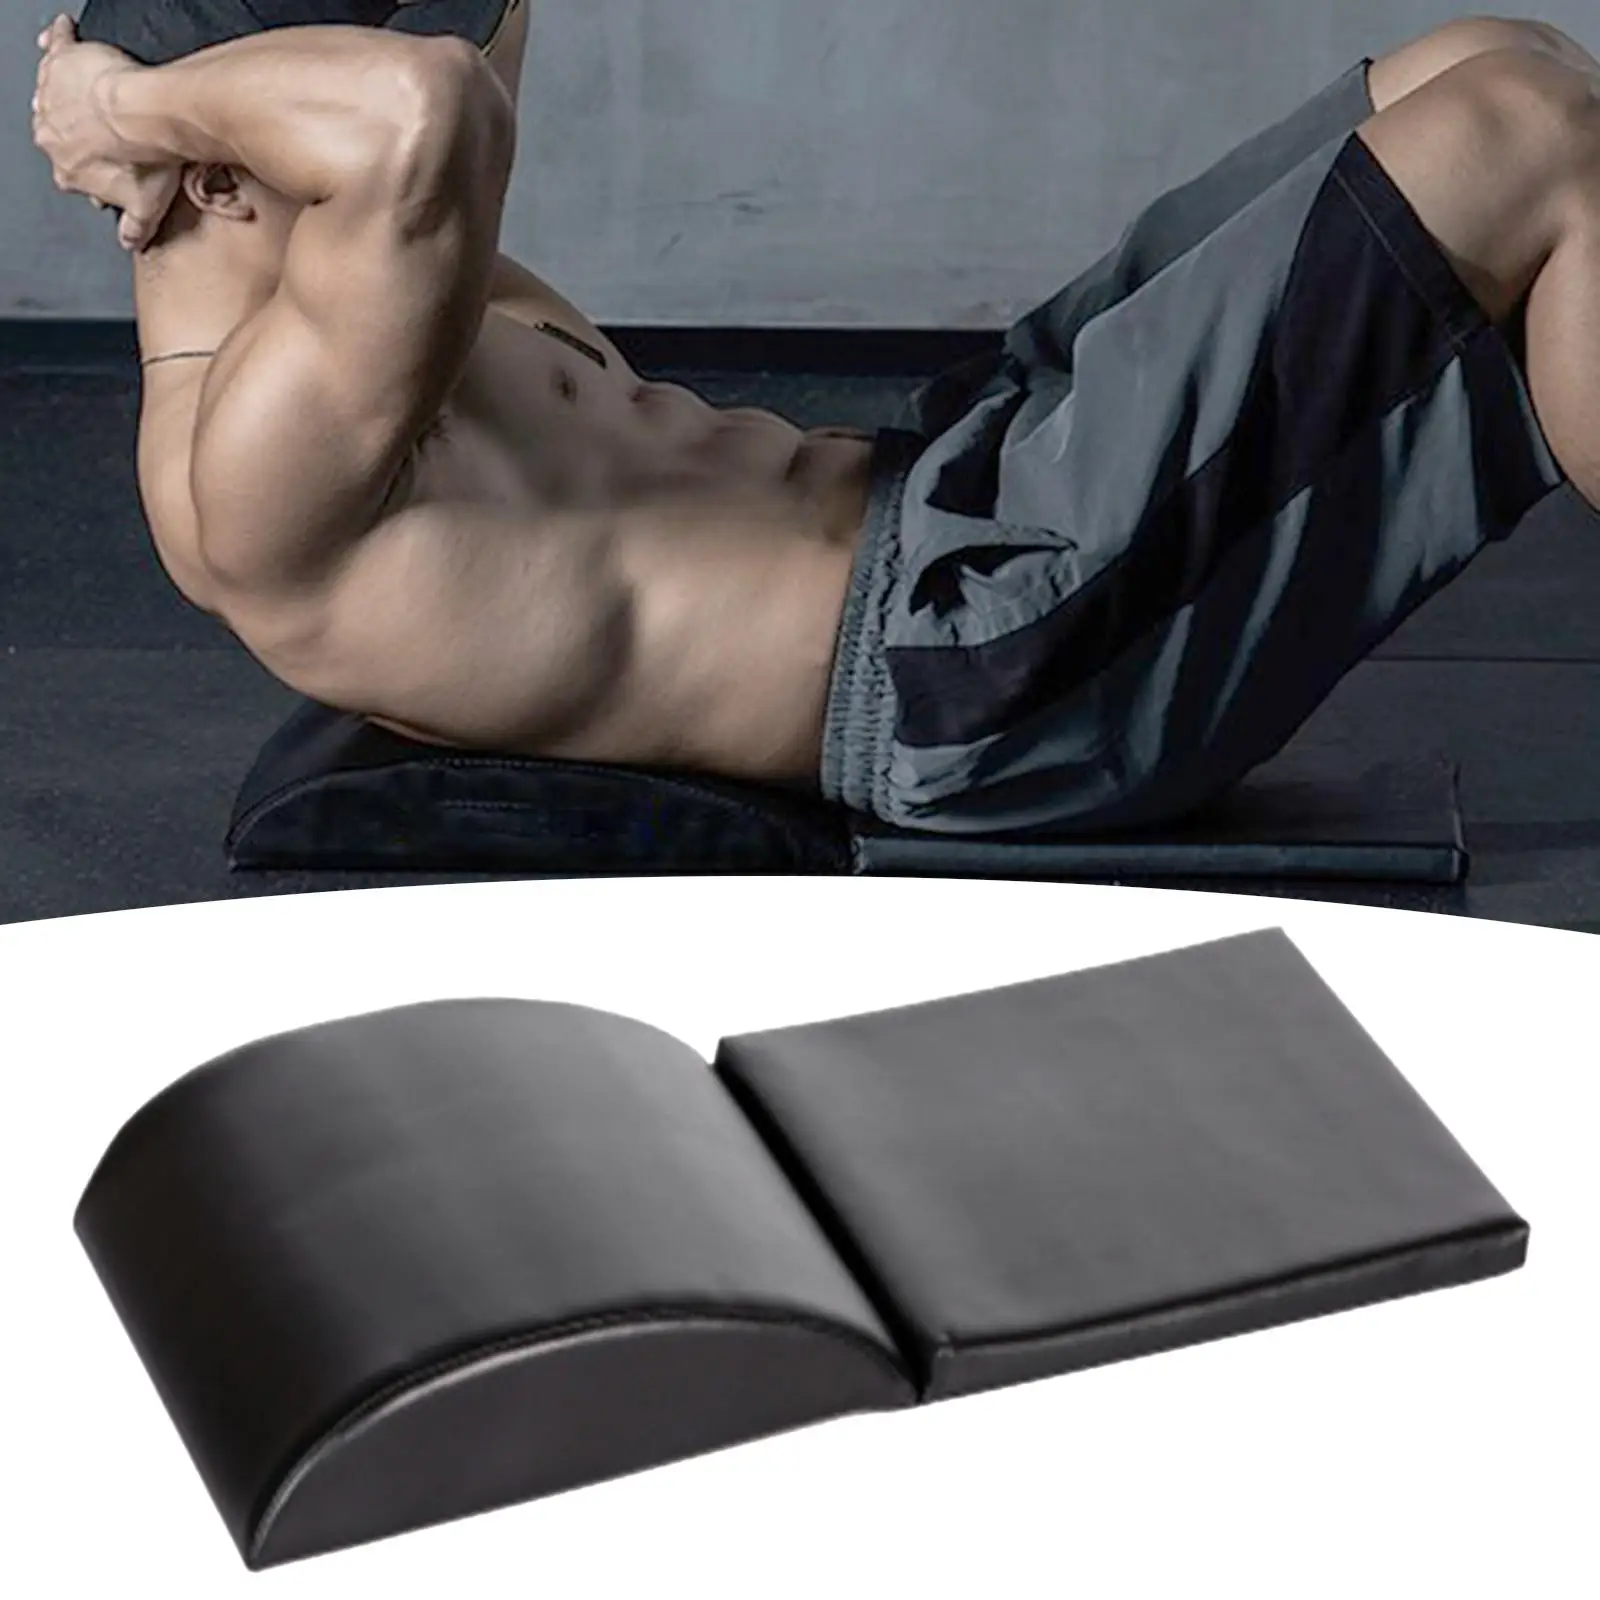 Ab Exercise Ma, Abdominal Sit Up Core Trainer Pad for Full Range Motion Workout Provides Lower Back Support Stretches Ab Muscles